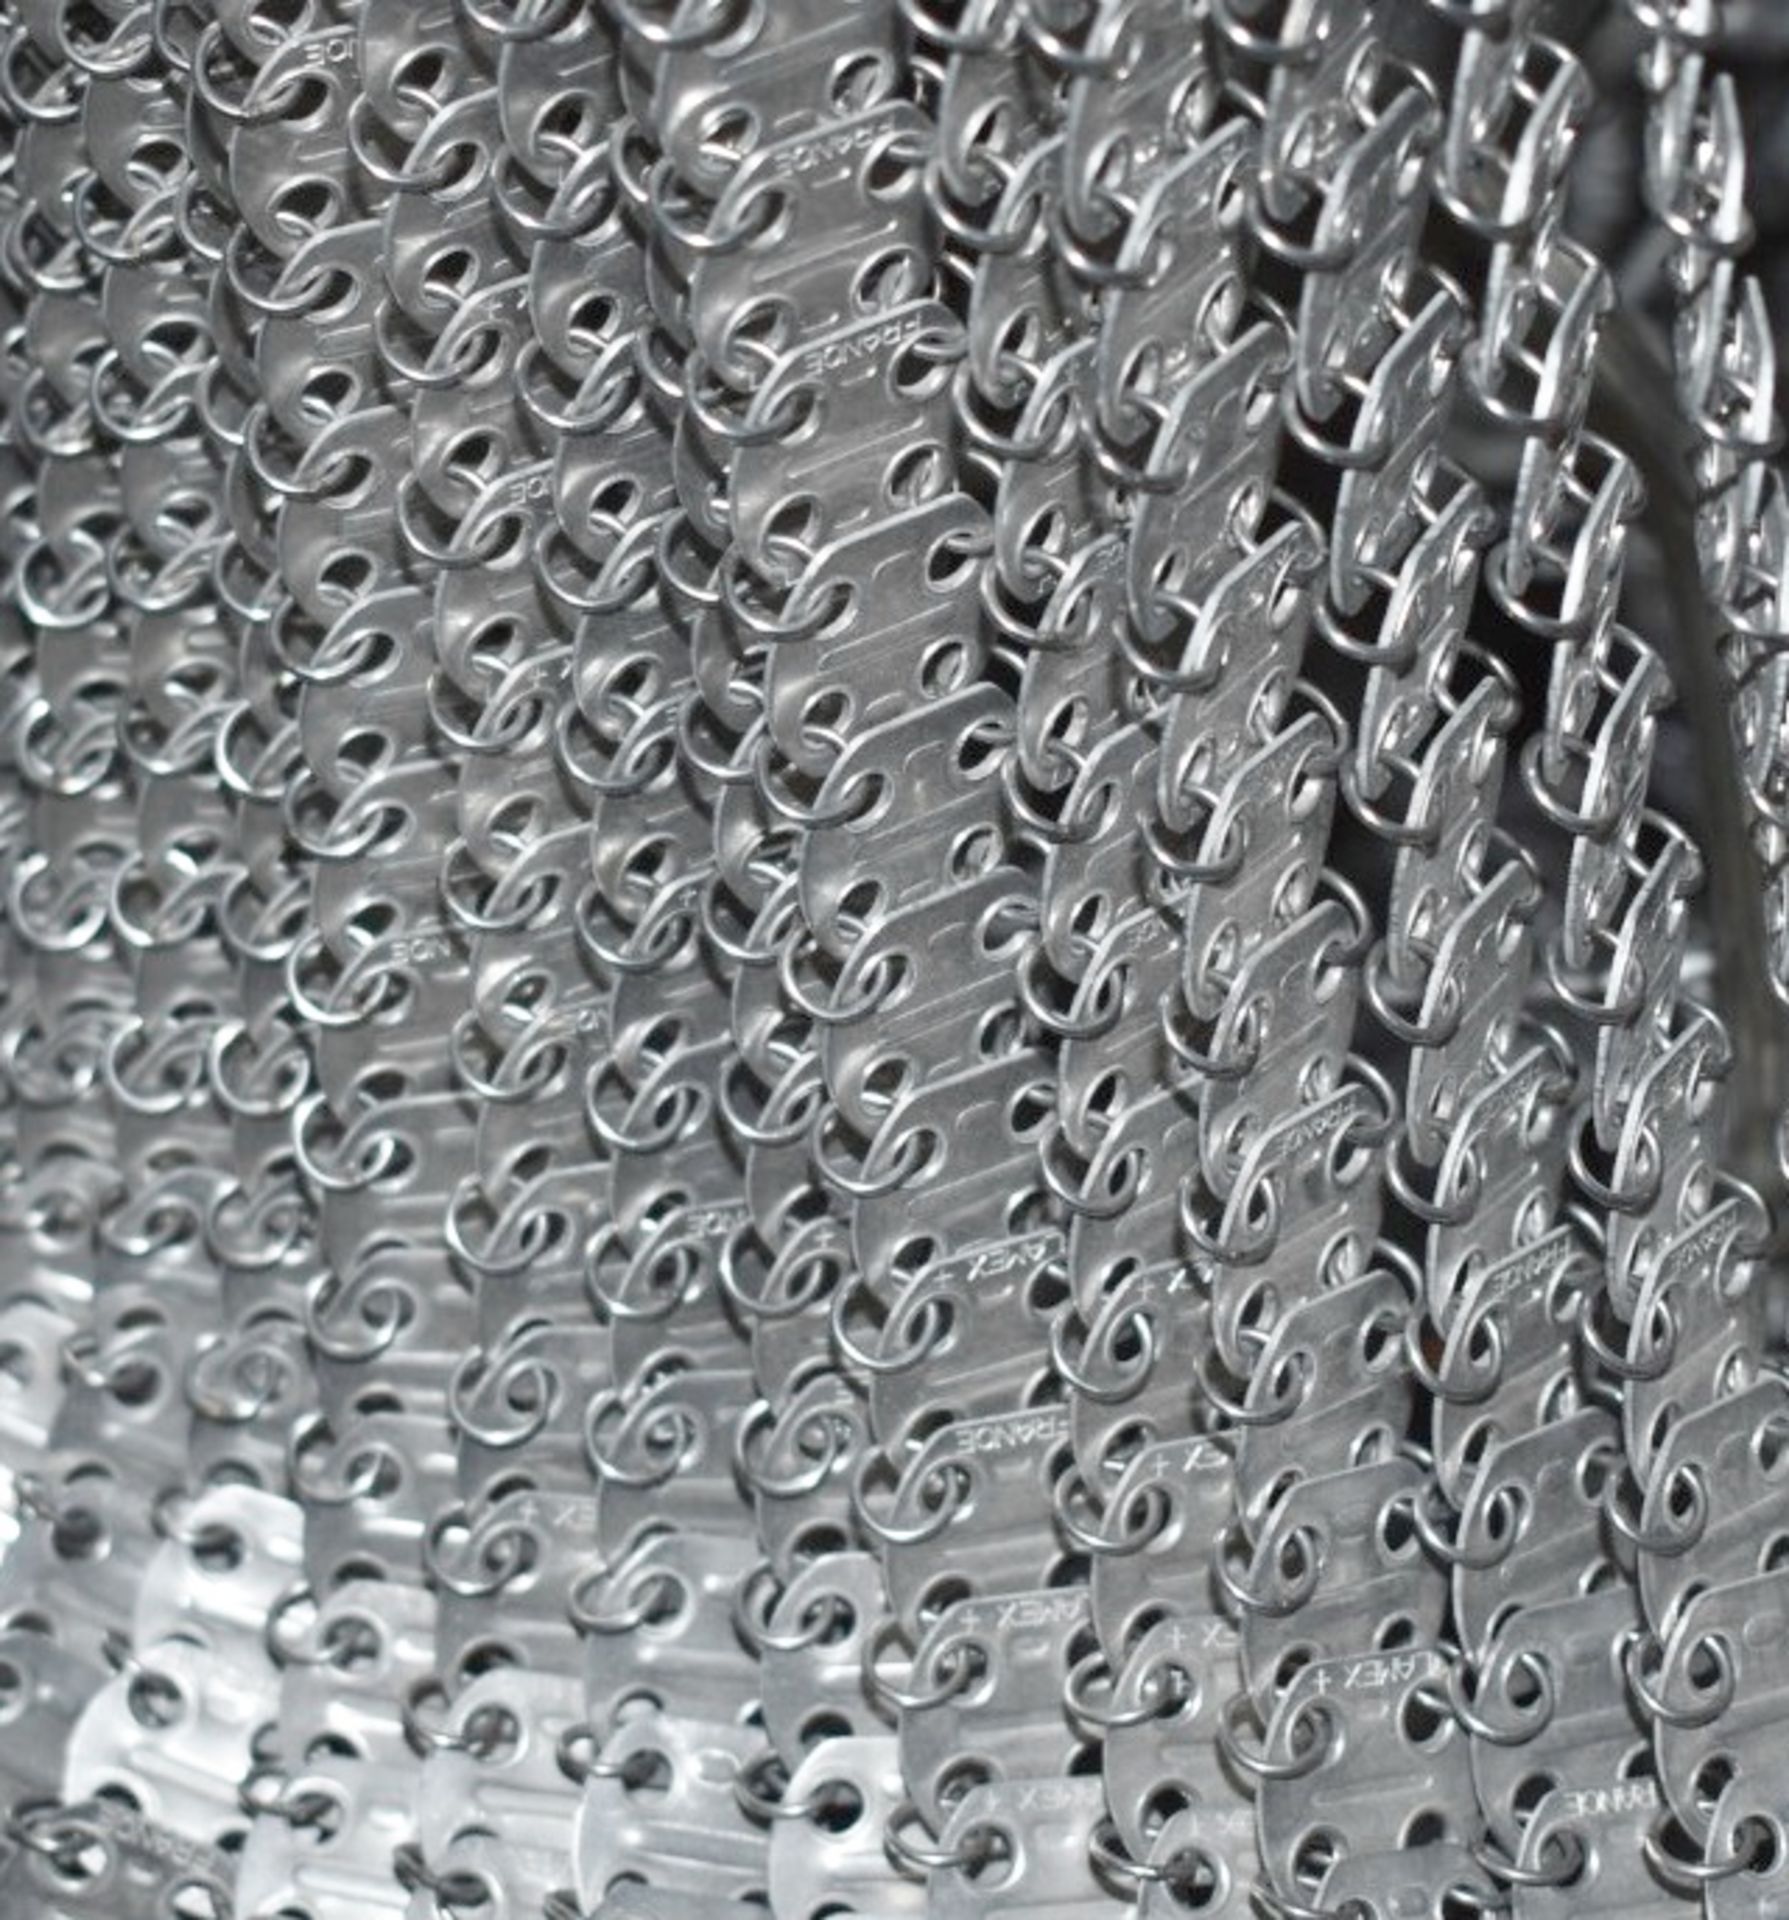 1 x Opulent Chainmail Chandelier with Crystal Glass Droplets - Procured From An Exclusive Property - Image 2 of 8